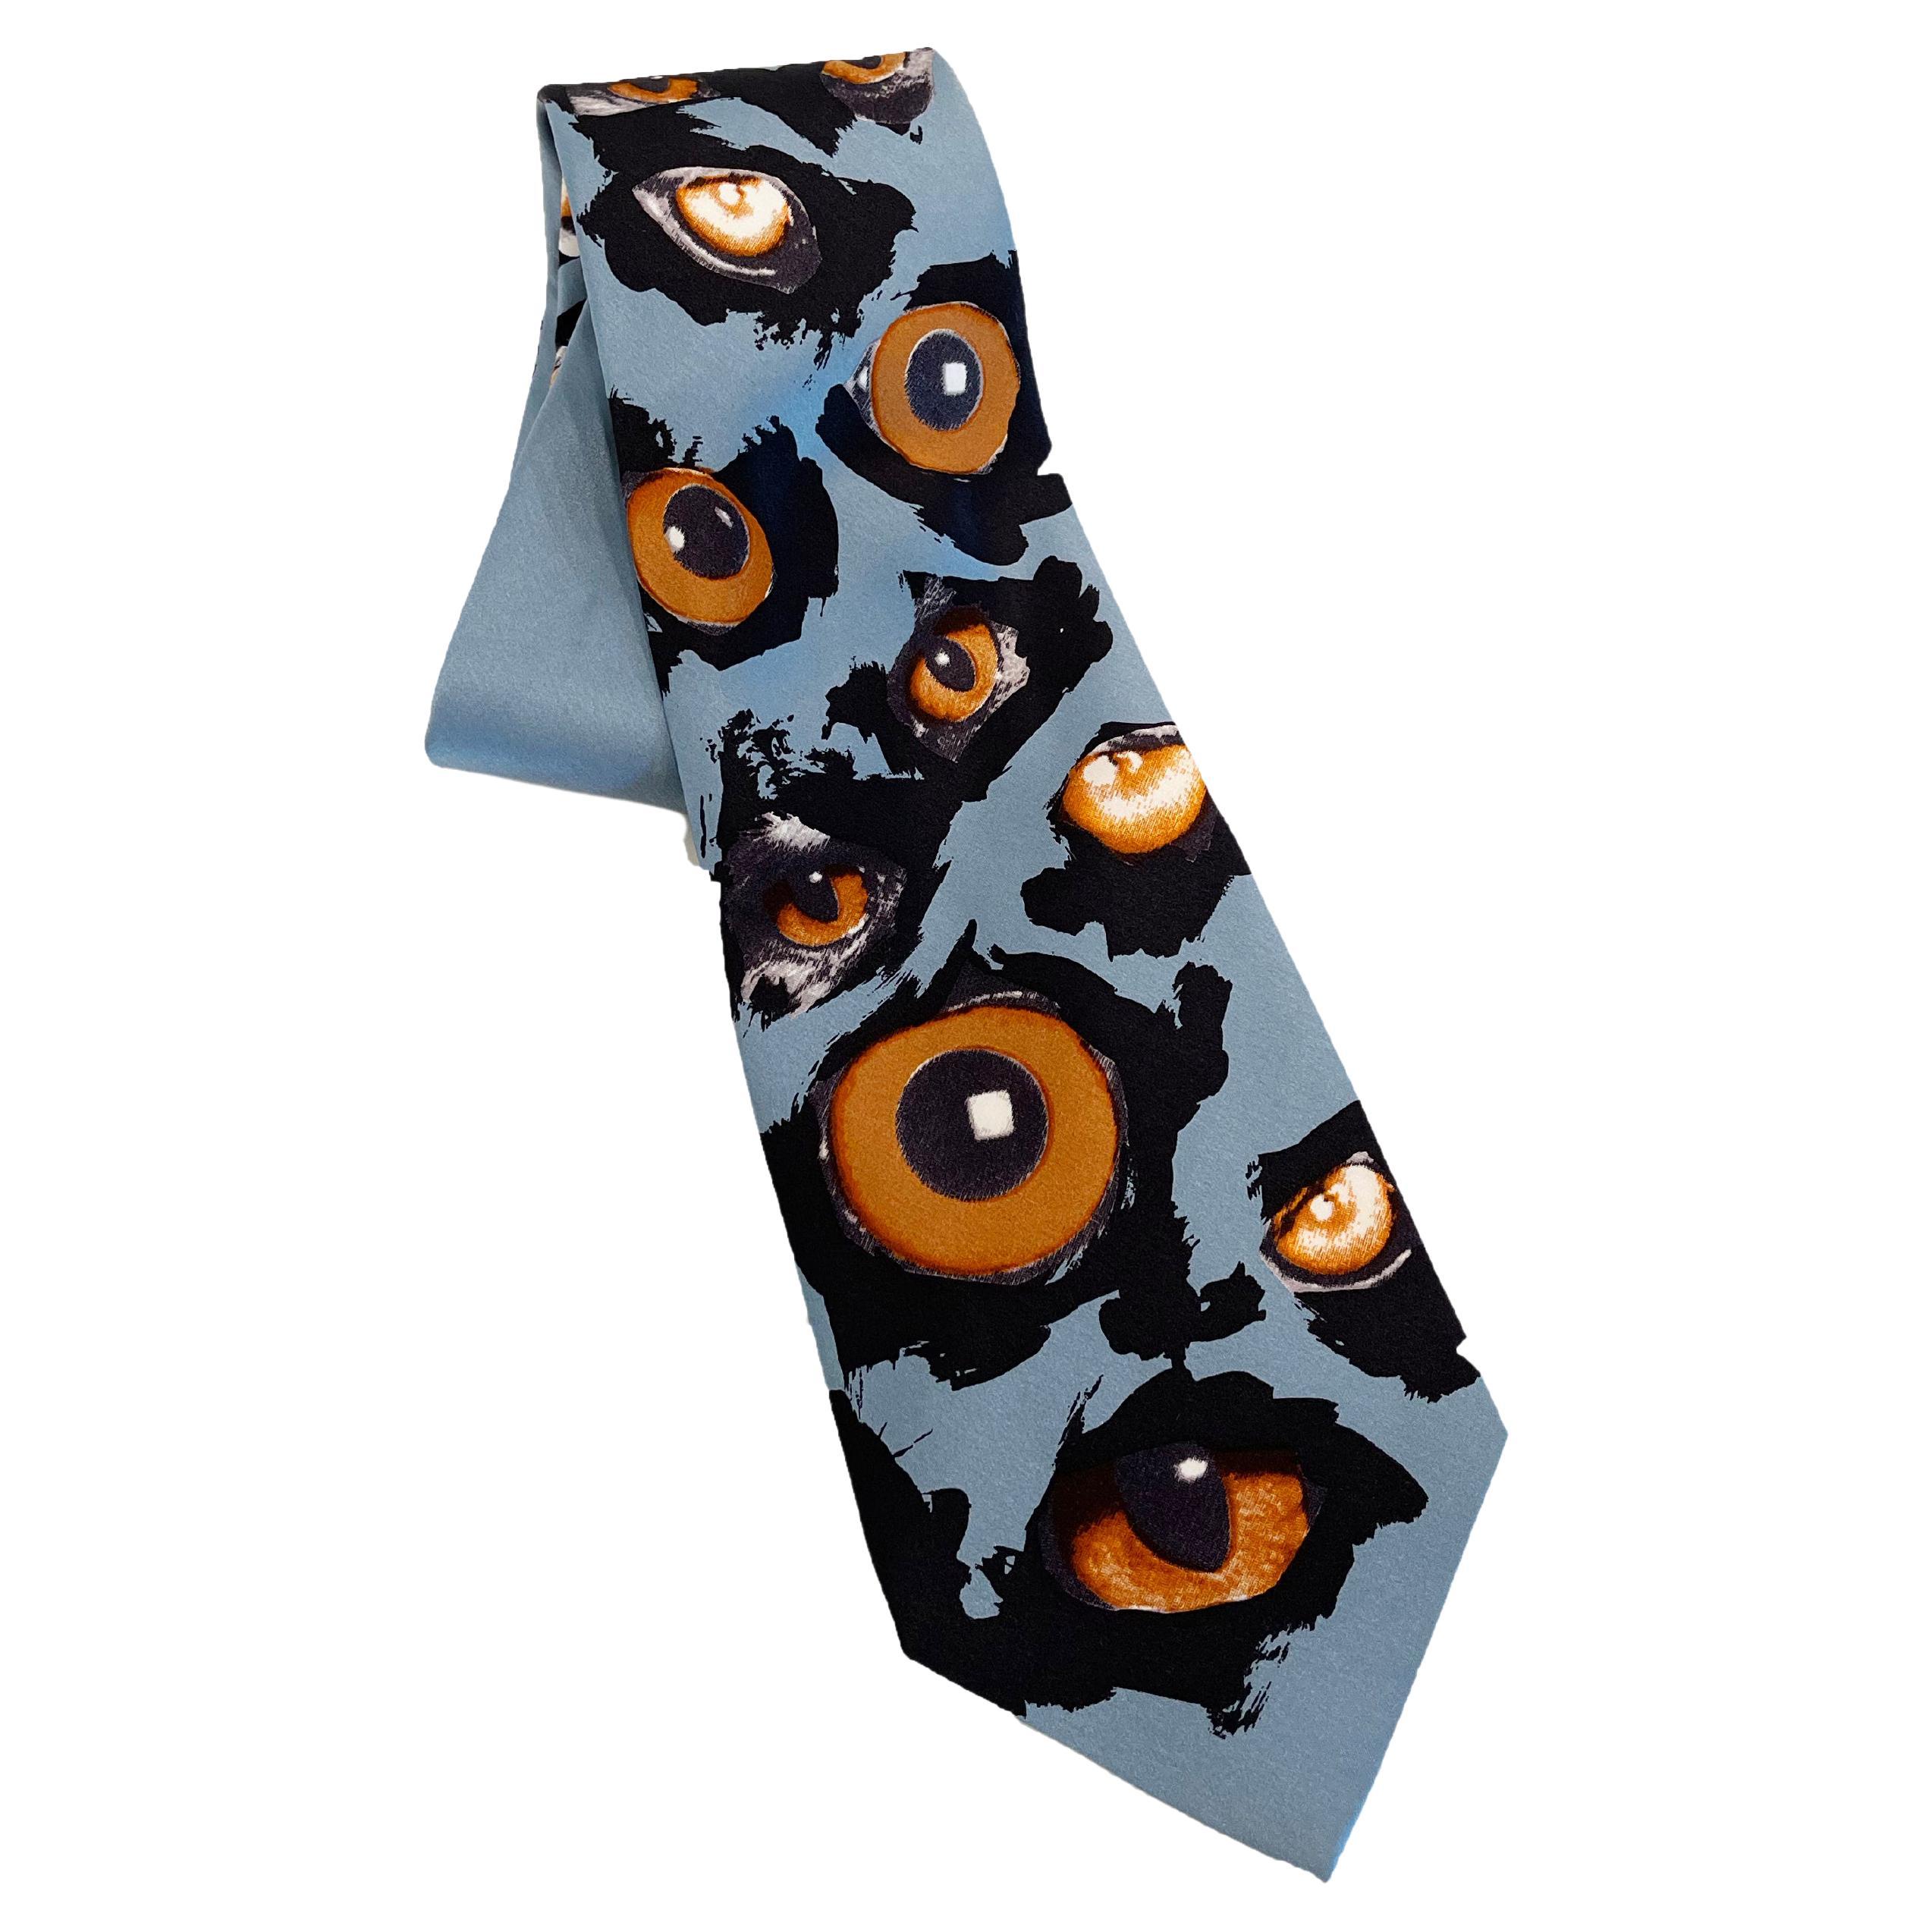 1990s Jean Paul Gaultier Silk Tie with Eye Ball Print For Sale at